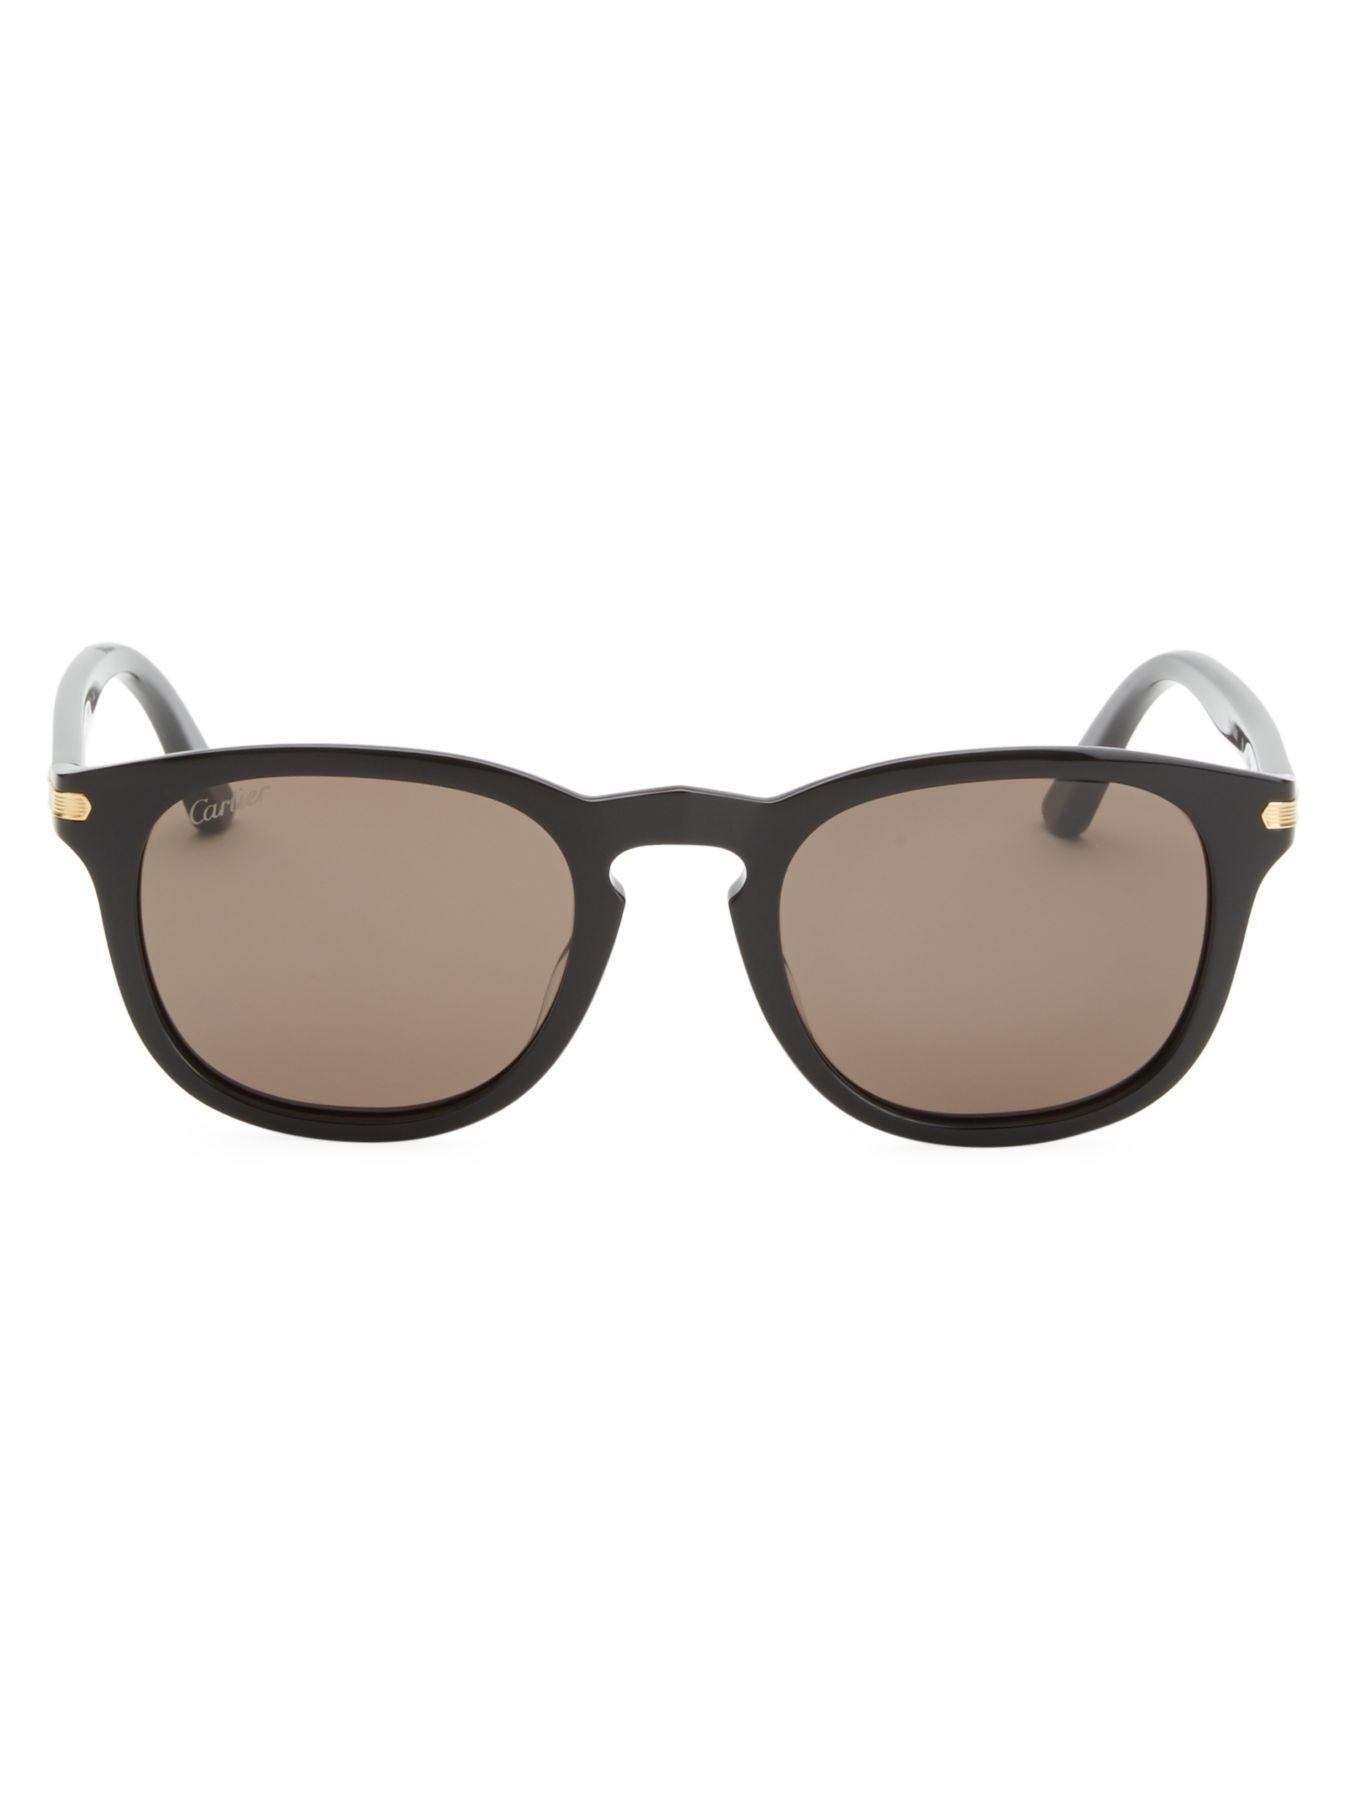 Cartier 51mm Round Sunglasses in Black for Men - Lyst